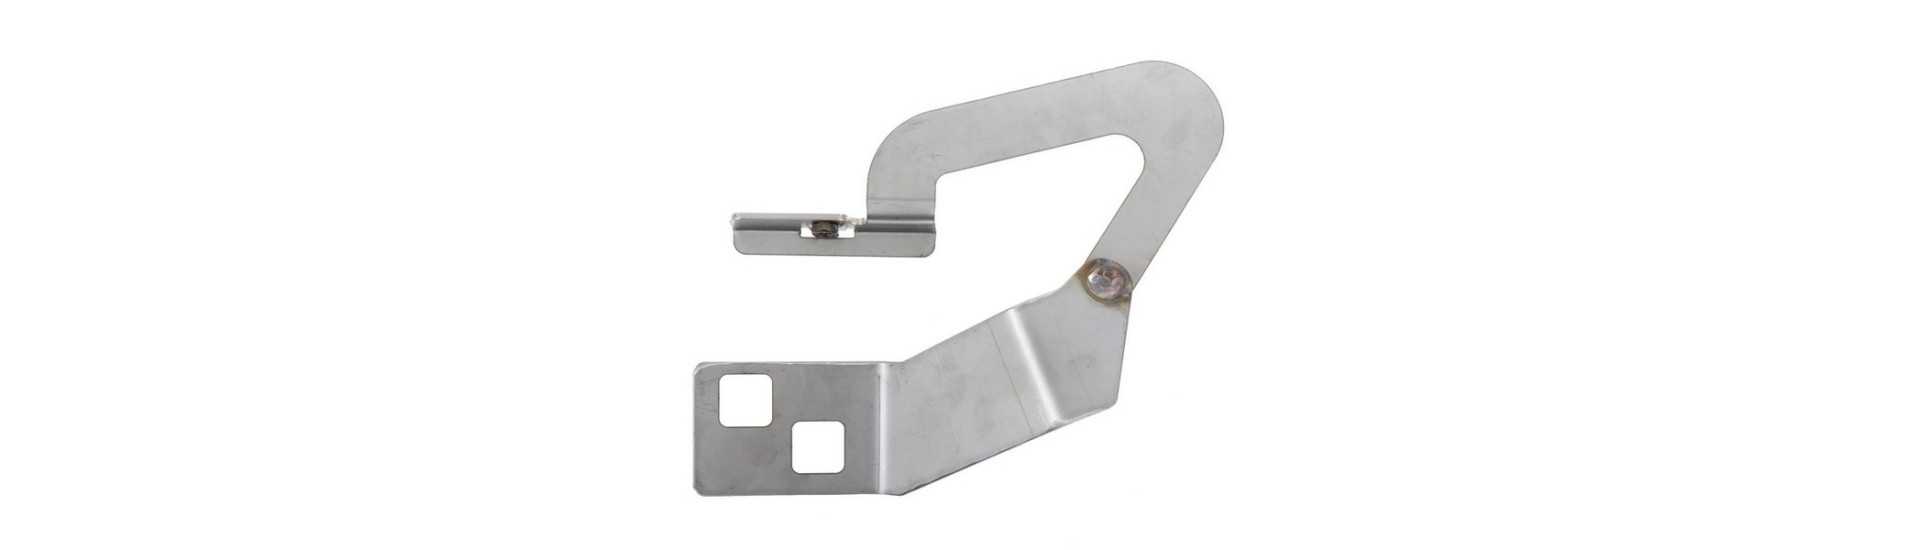 Hood door hinge at the best price car without a permit